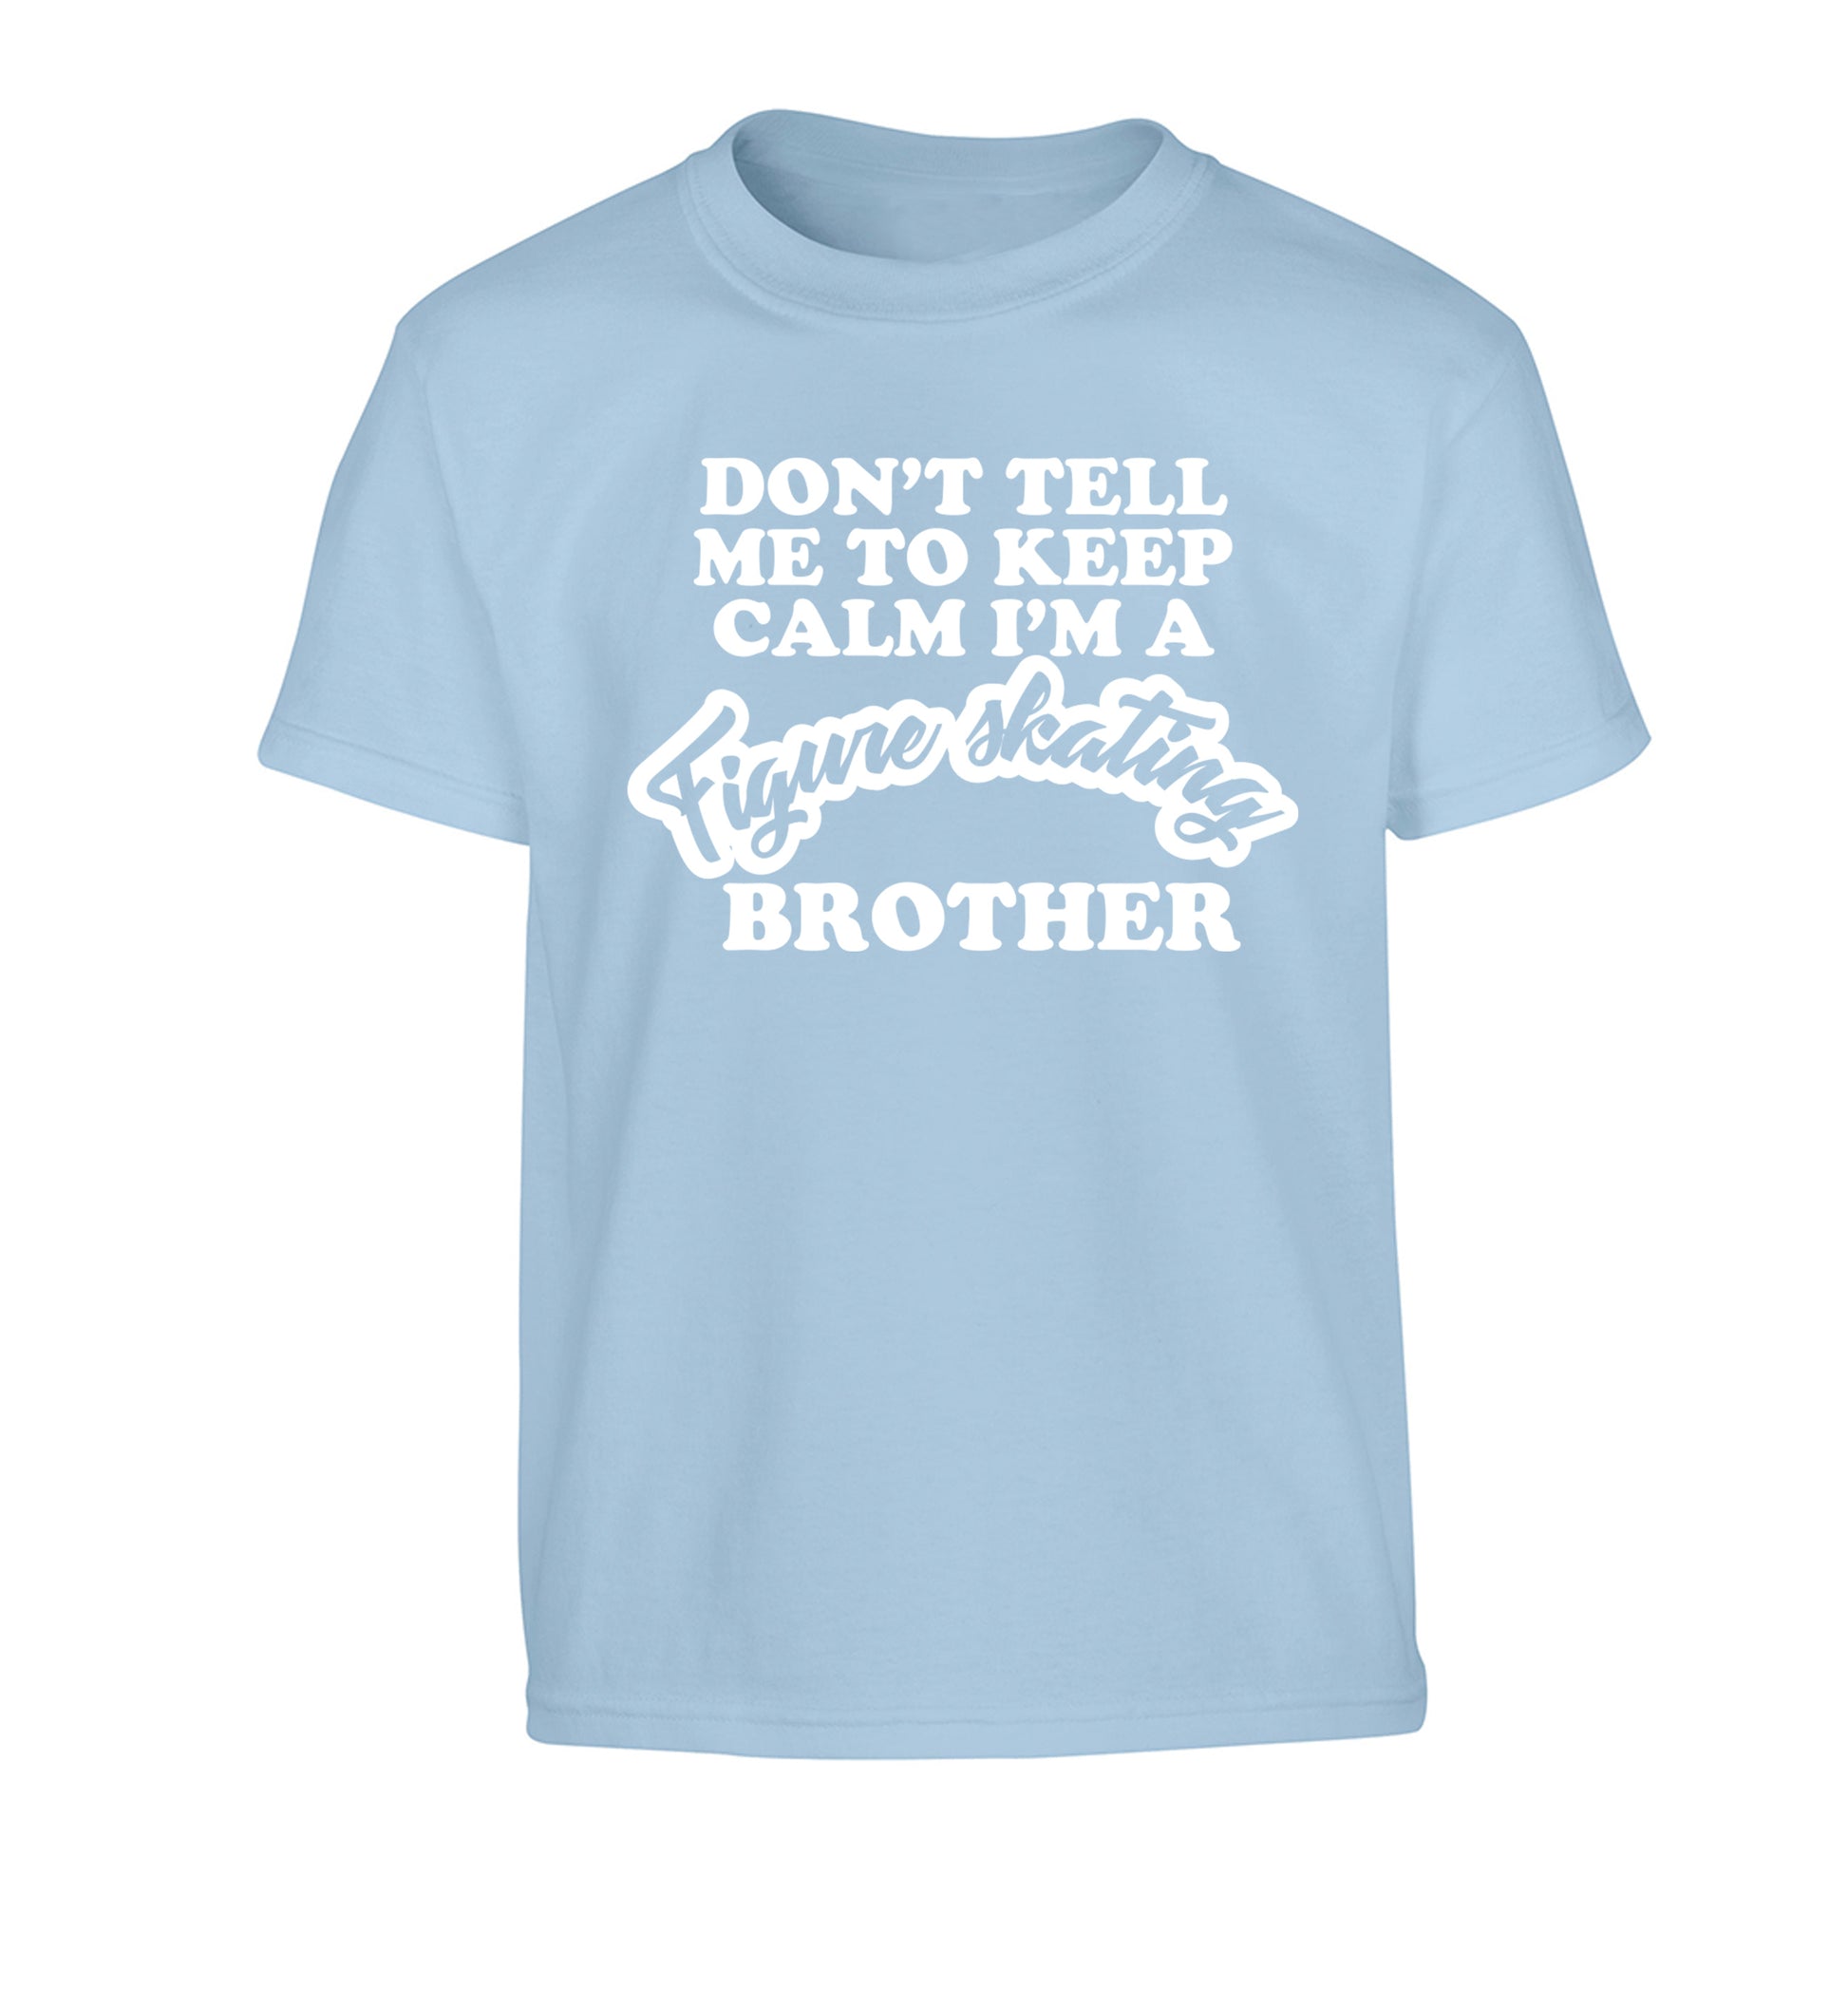 Don't tell me to keep calm I'm a figure skating brother Children's light blue Tshirt 12-14 Years